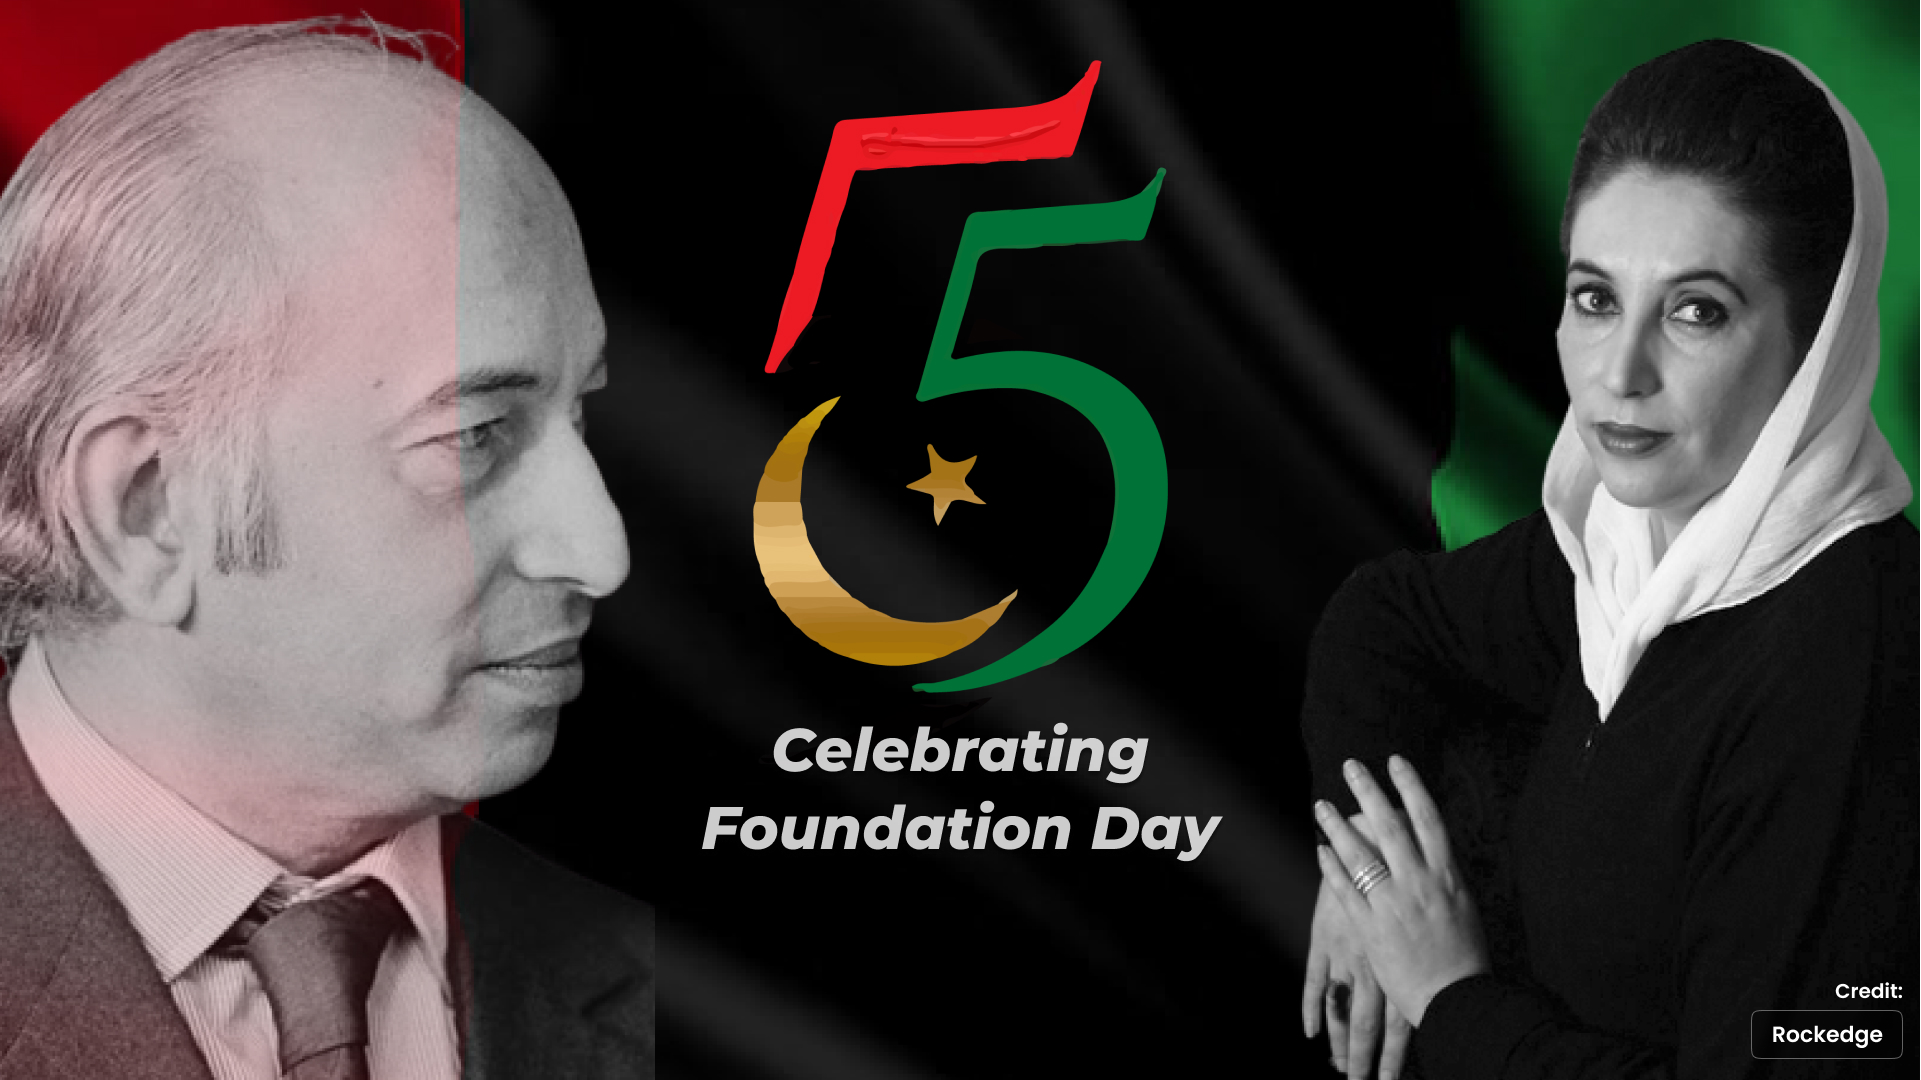 PPP observed today its 55th Anniversary